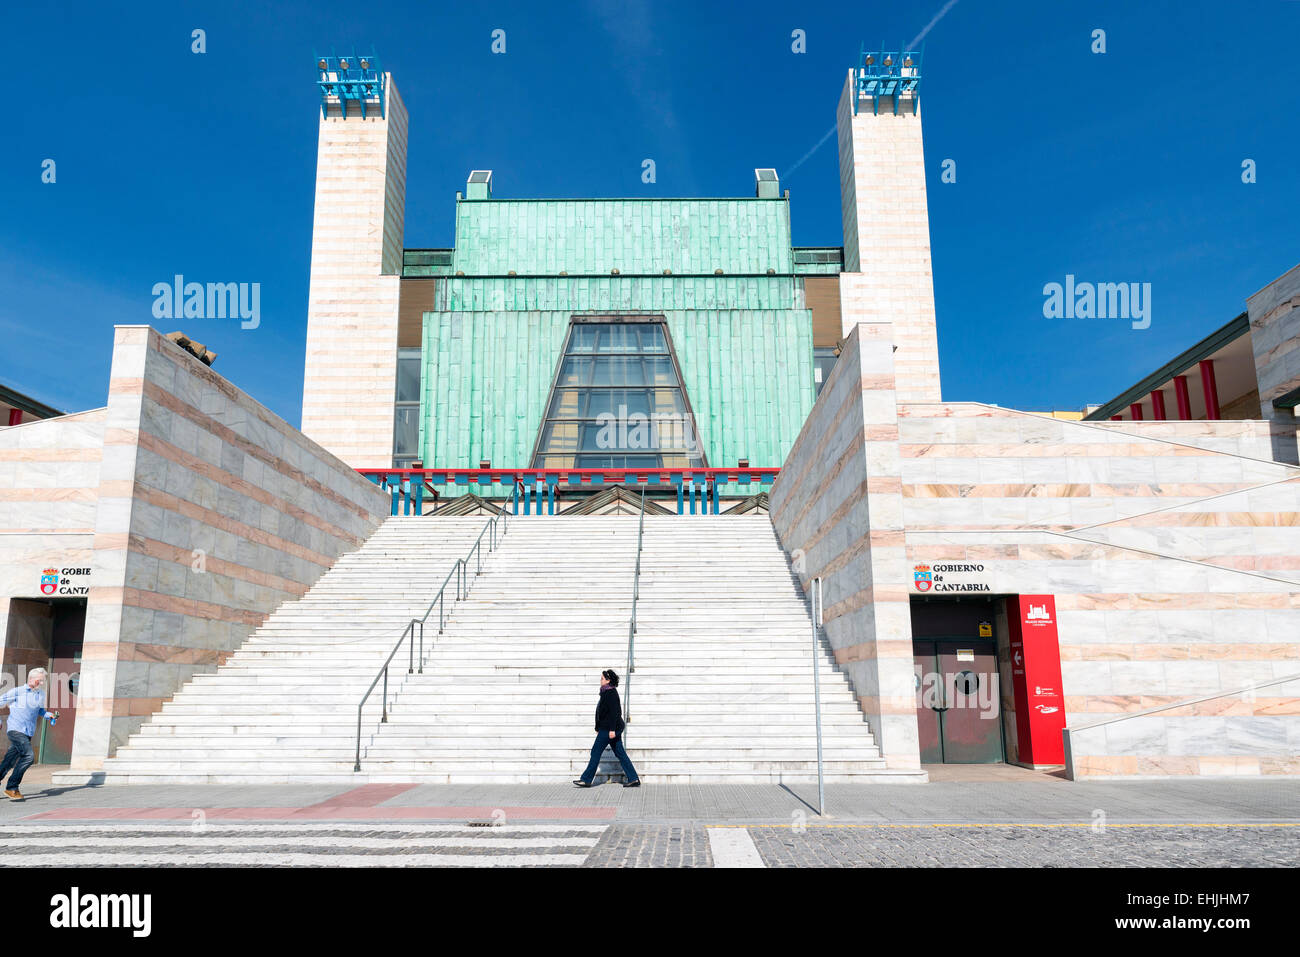 SANTANDER, SPAIN - MARCH 10, 2015: The new Festival palace in the city of Santander, Cantabria, Spain Stock Photo